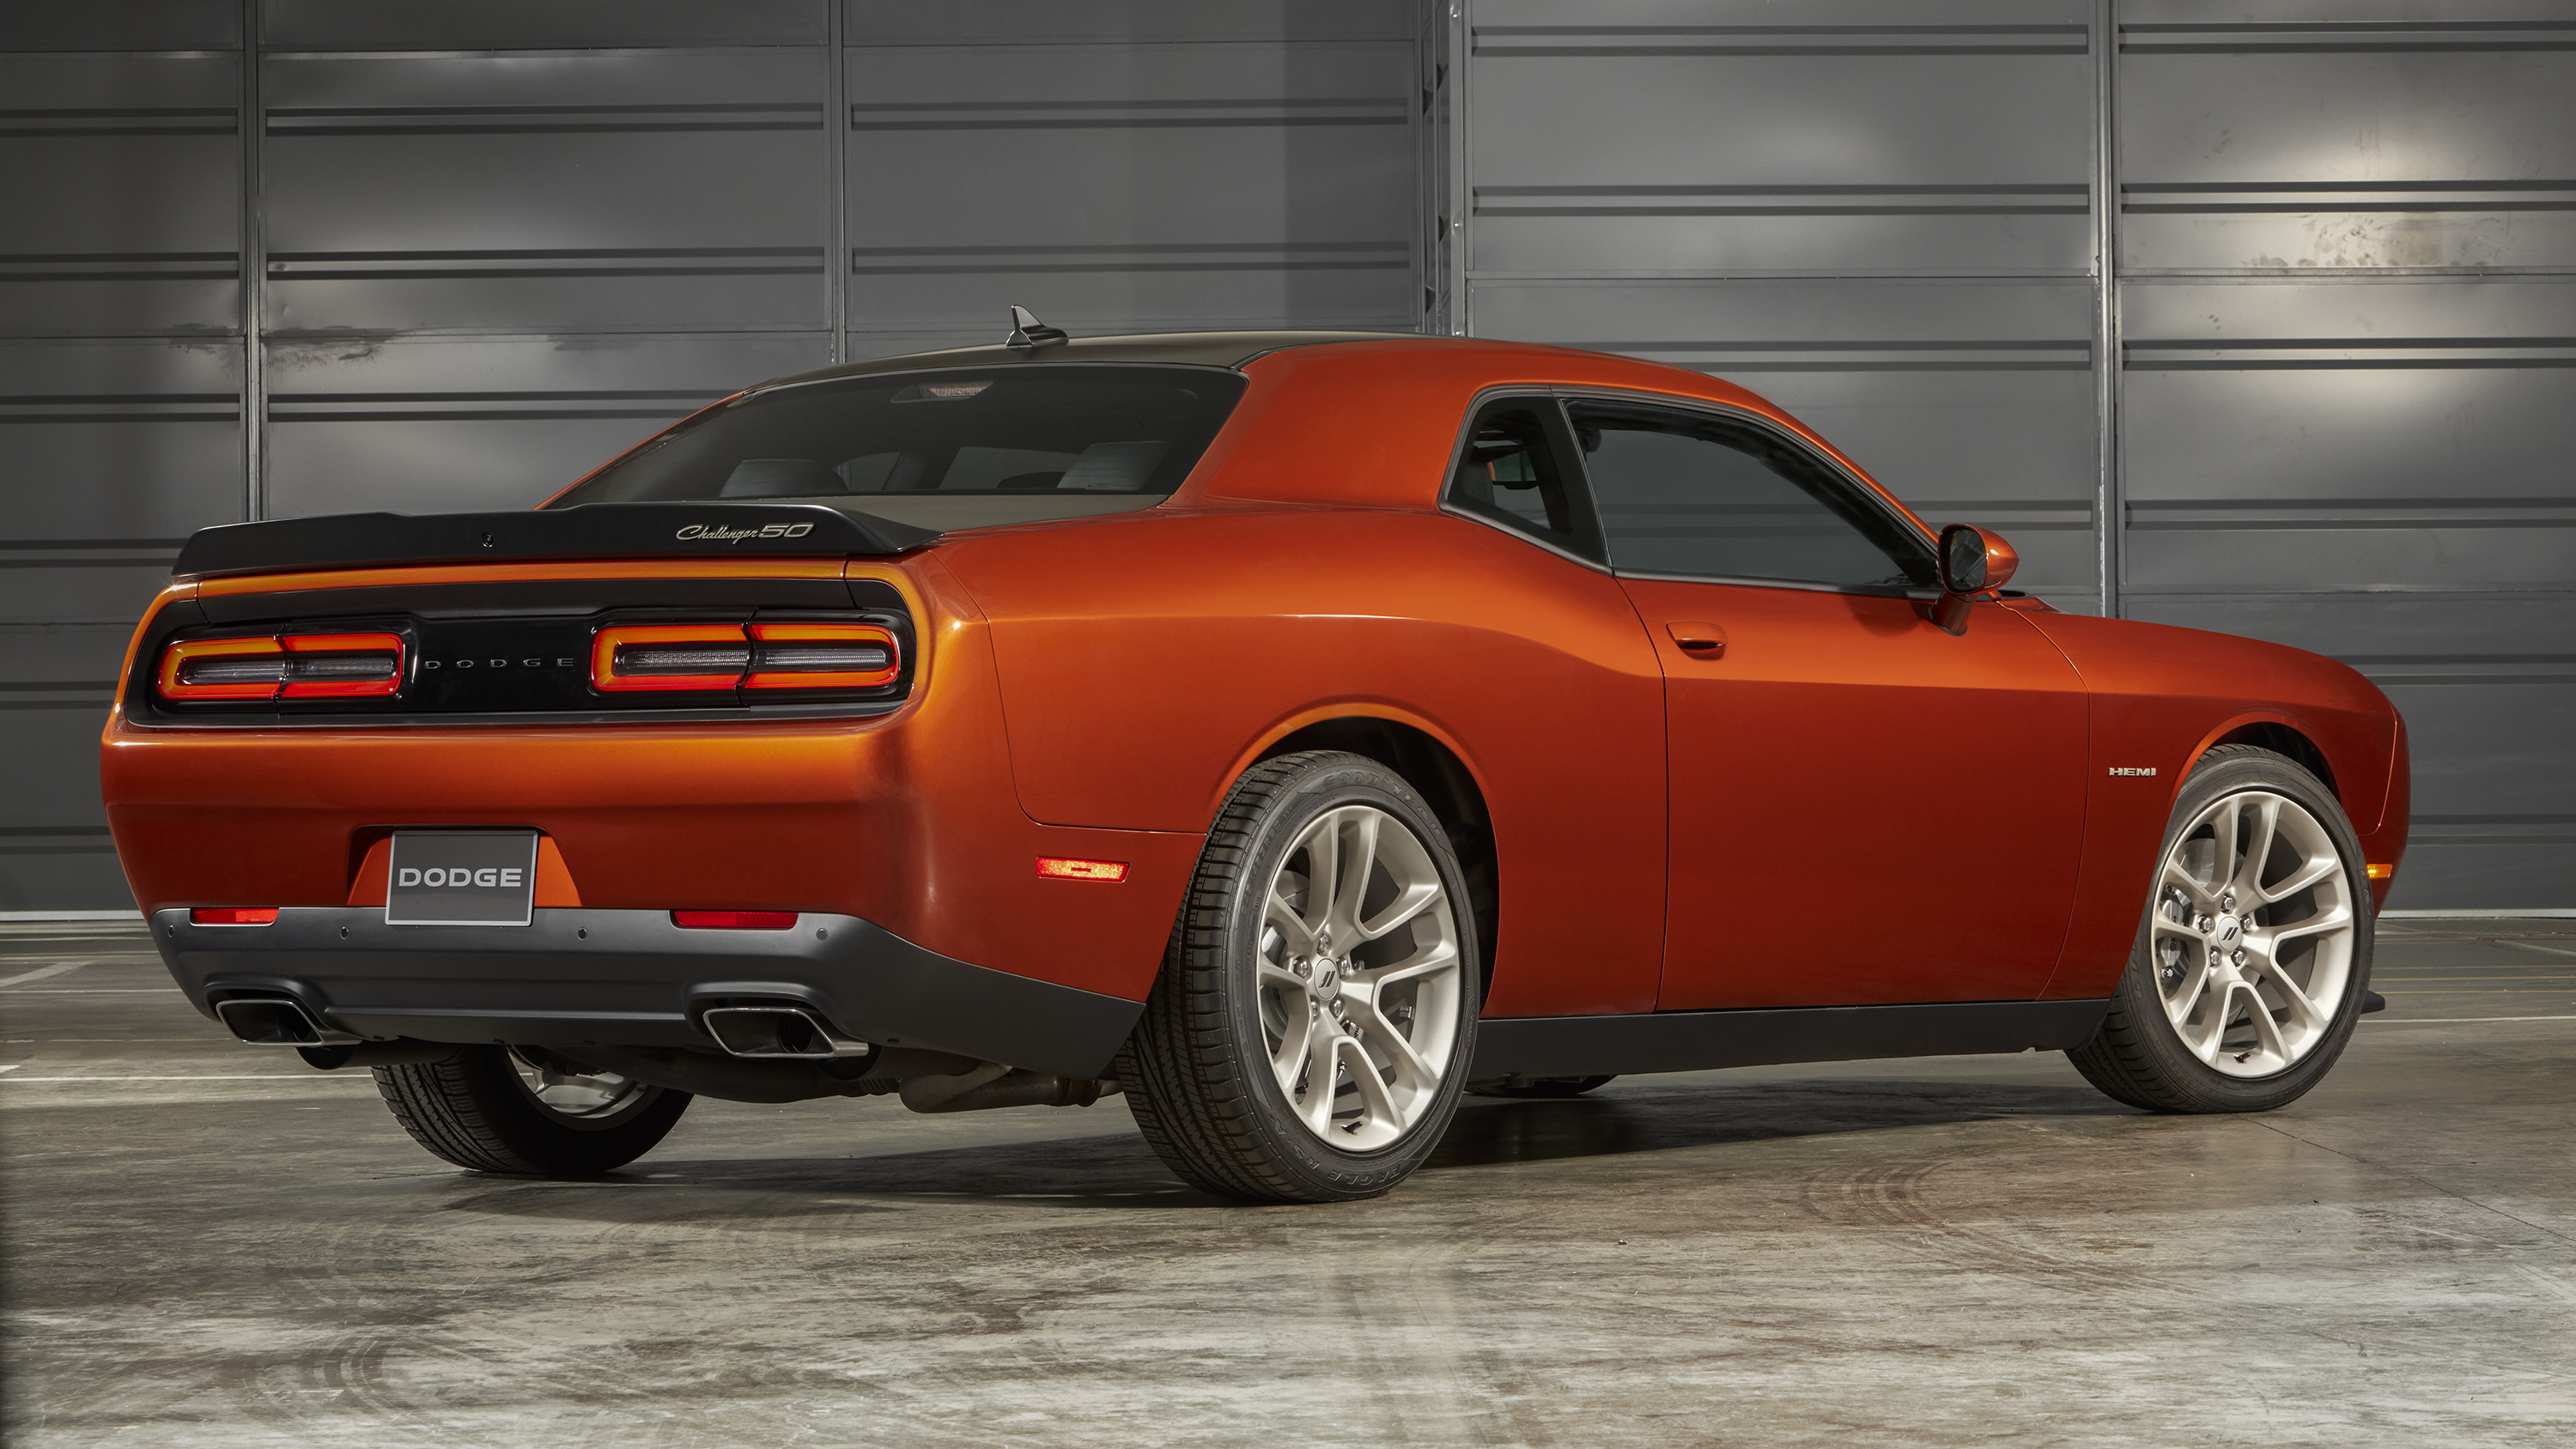 2020 Dodge Challenger Rt Shaker 50th Anniversary Edition 3 Wallpaper Hd Car Wallpapers 13796 